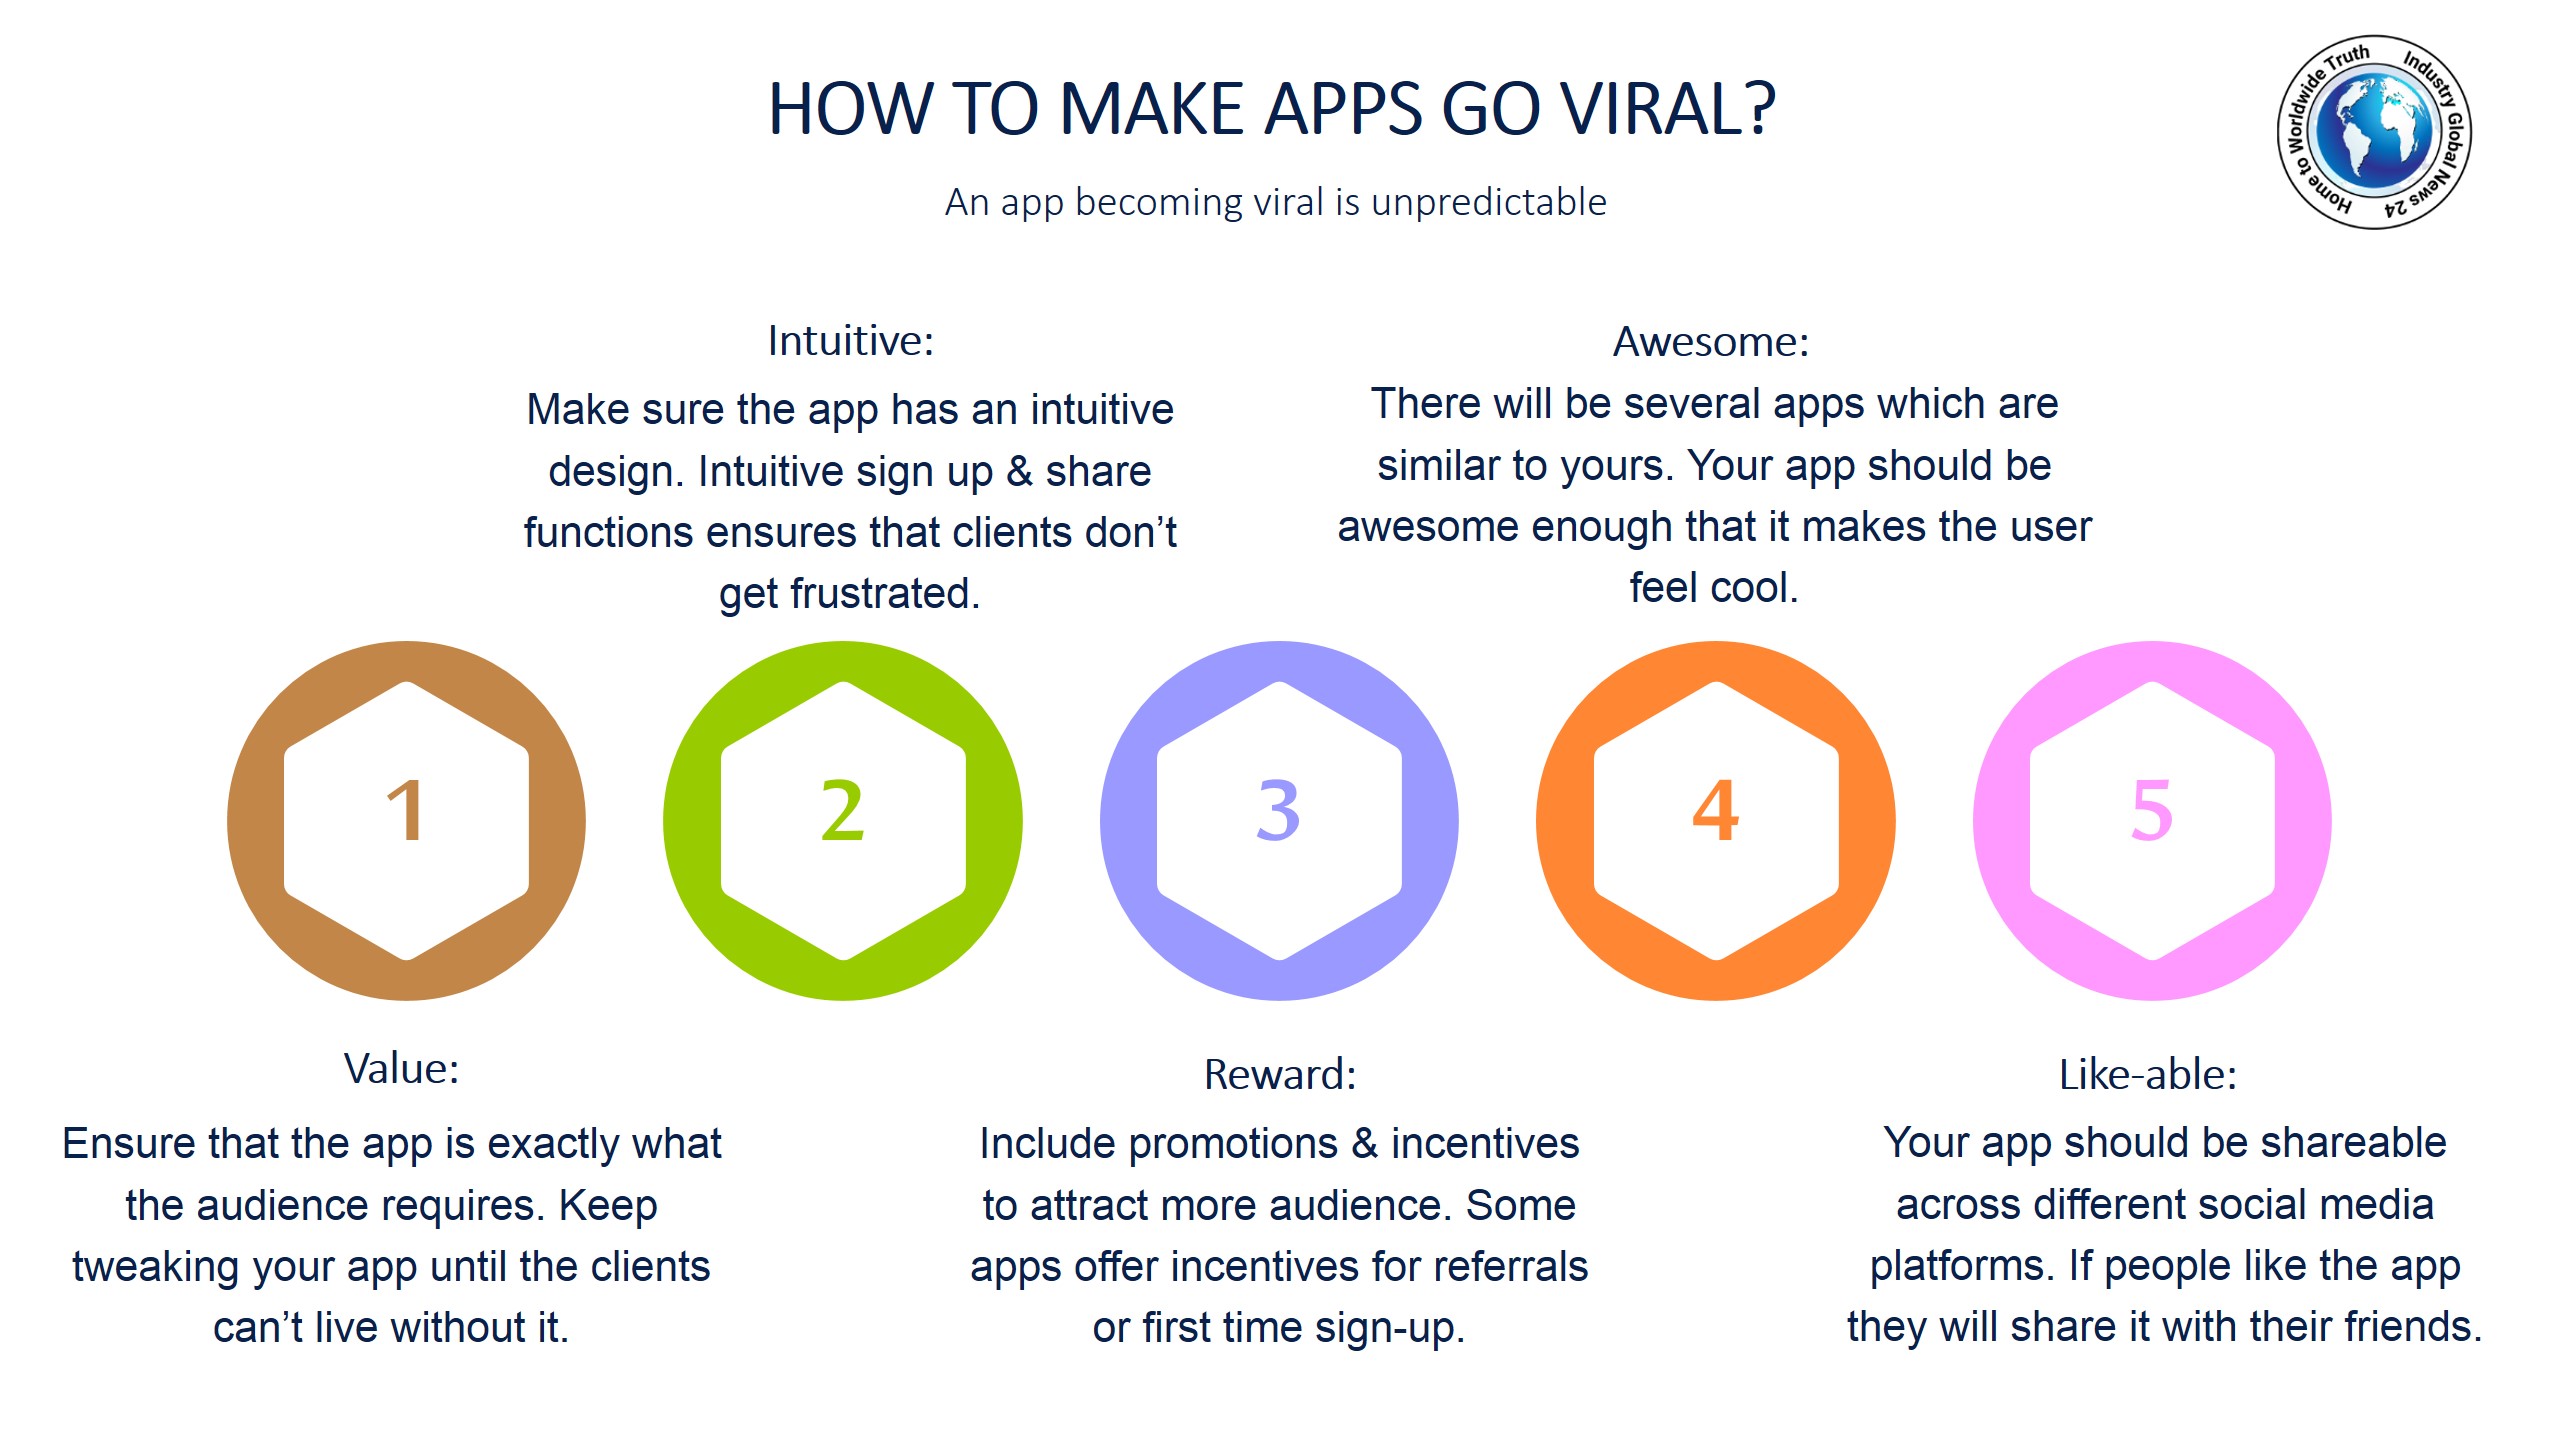 How to make apps go viral